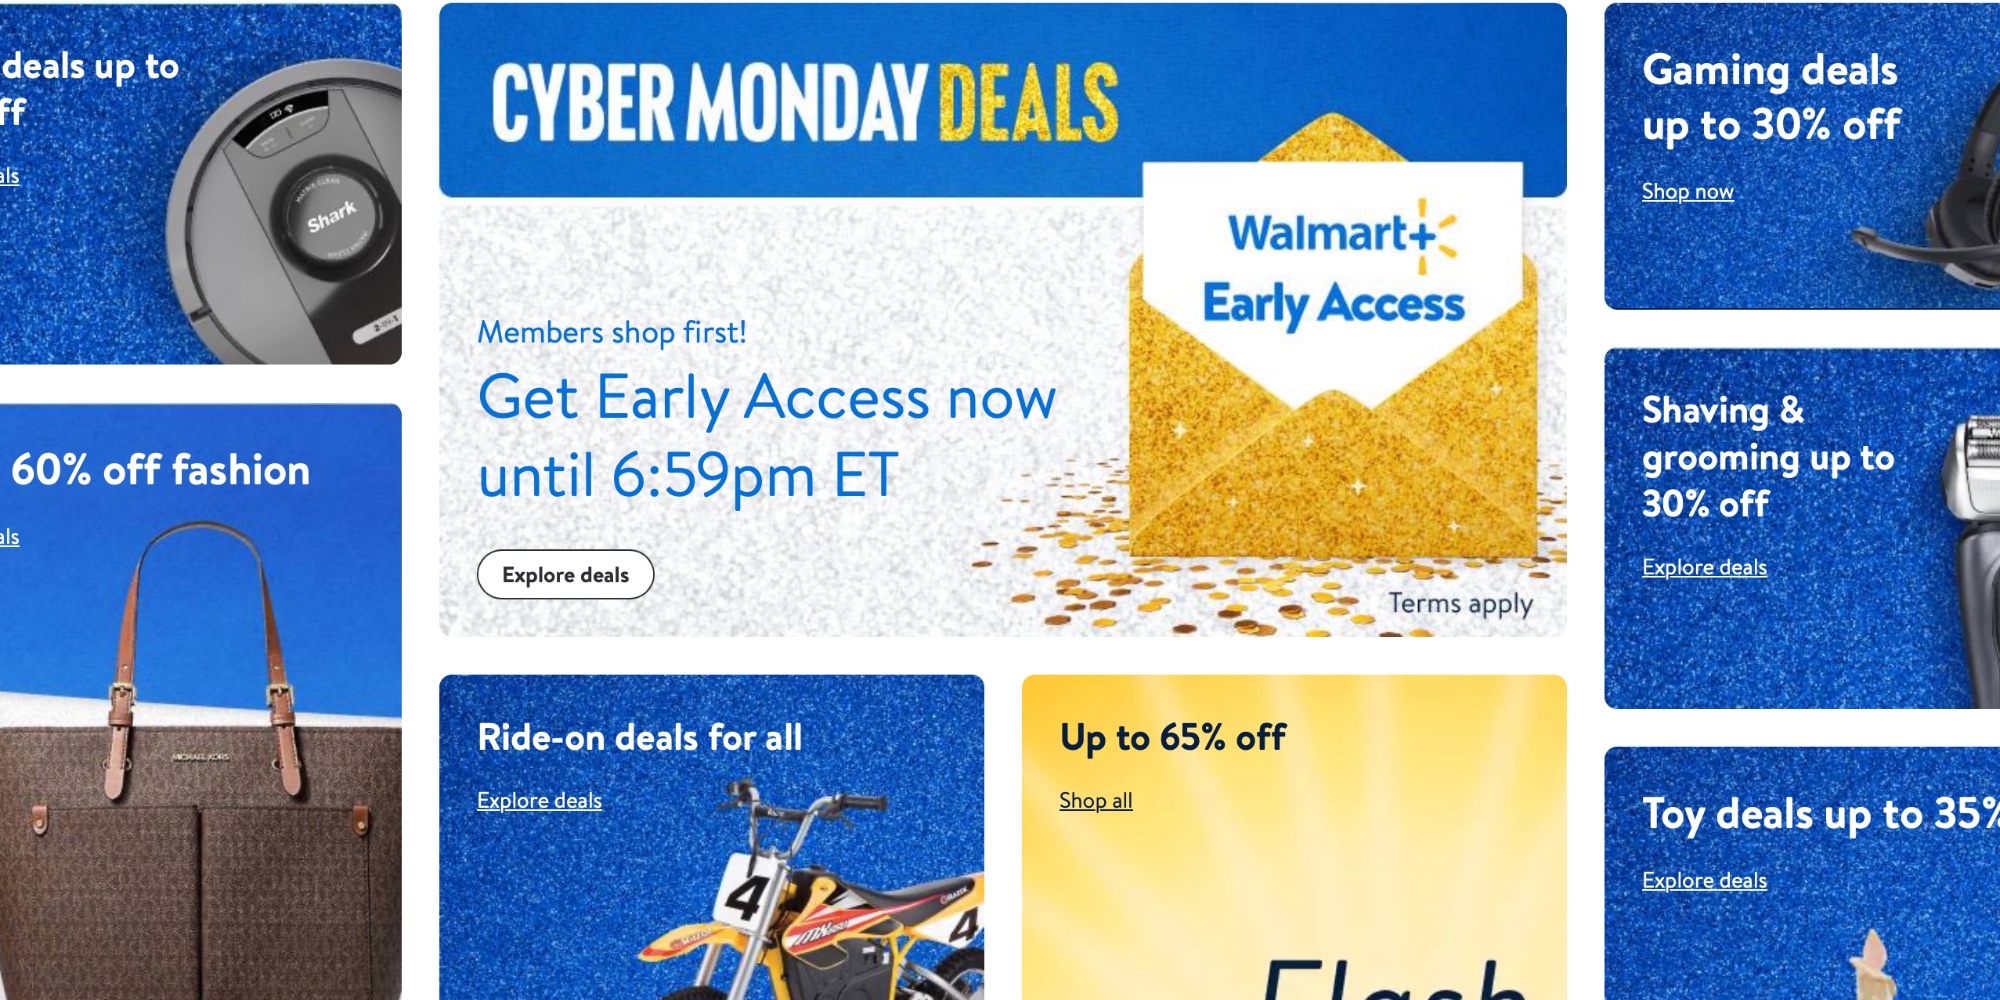 Walmart's Cyber Monday deals have leaked and these are some of the